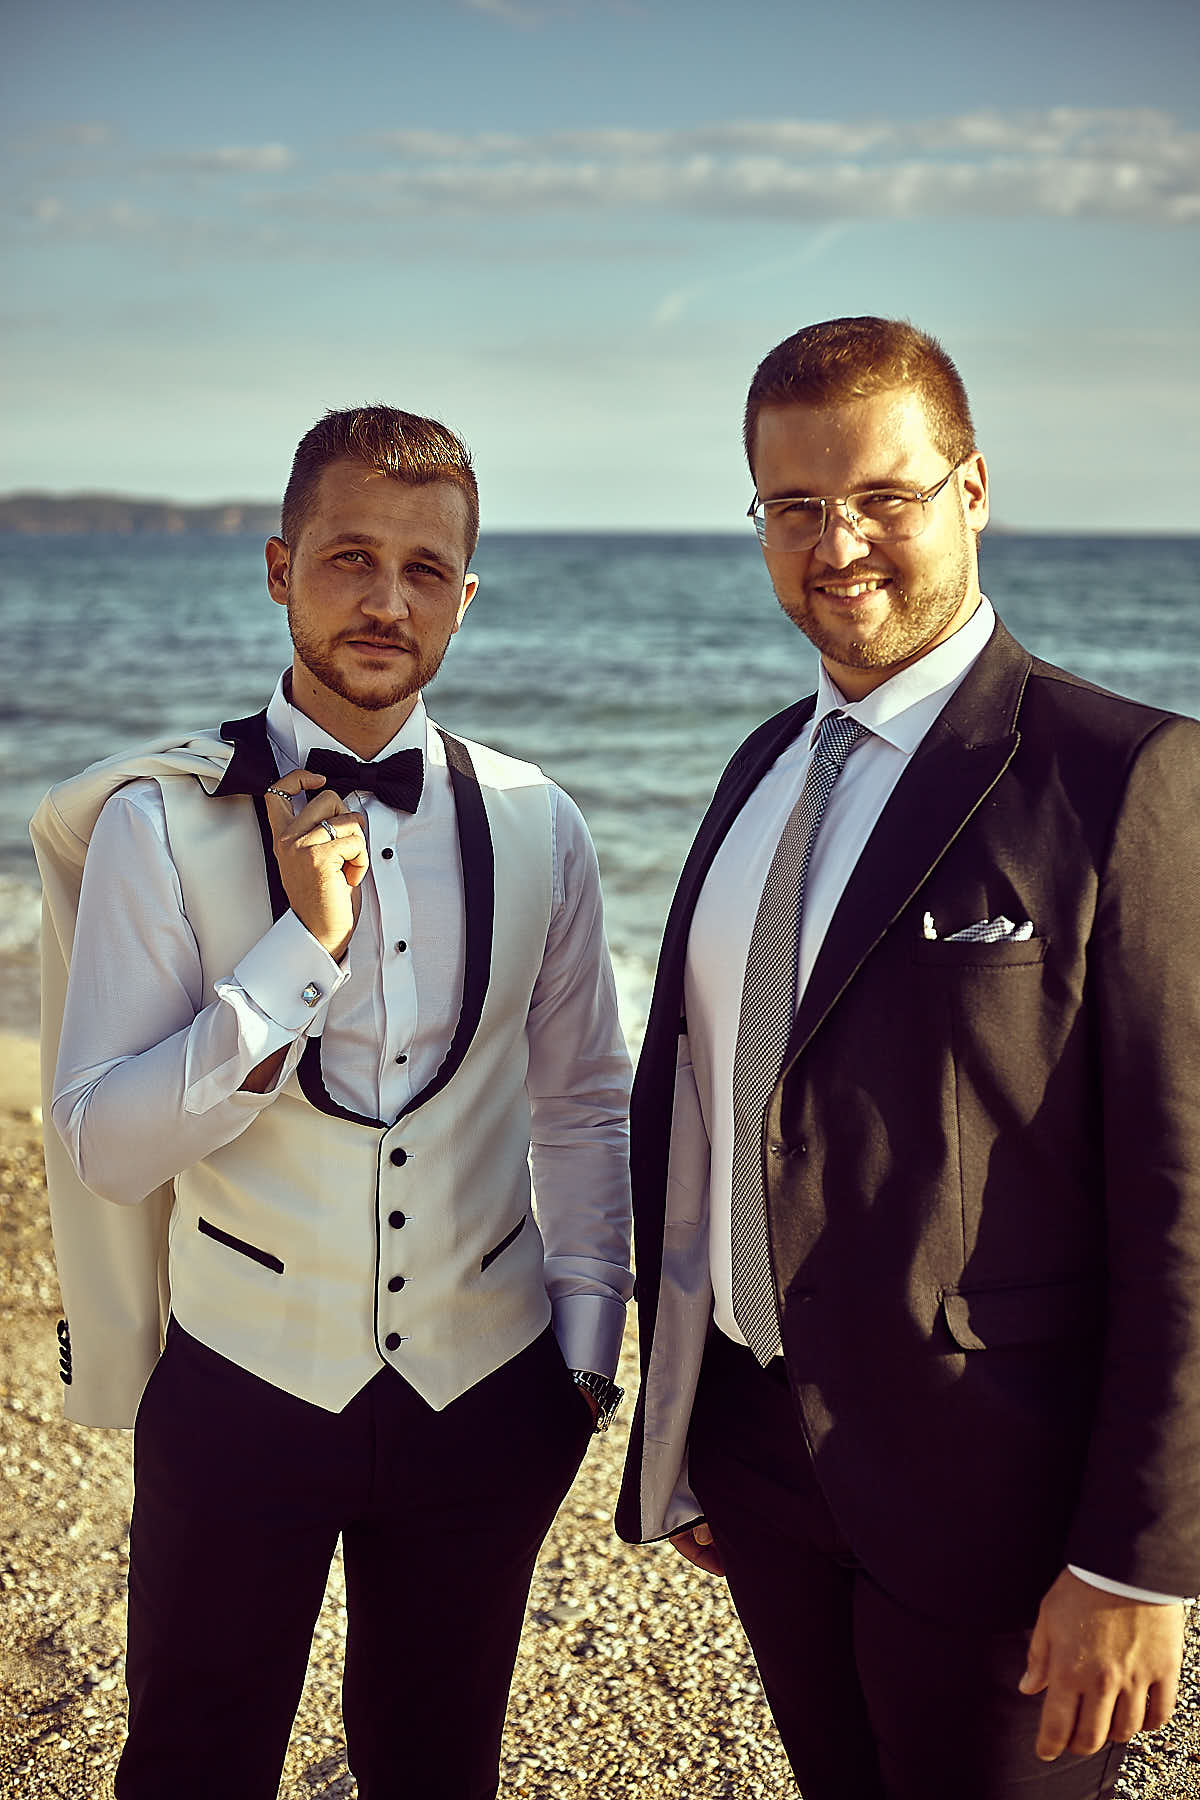 Groom with his jacket on his shoulder with a relative besides him, sea and sky on the background